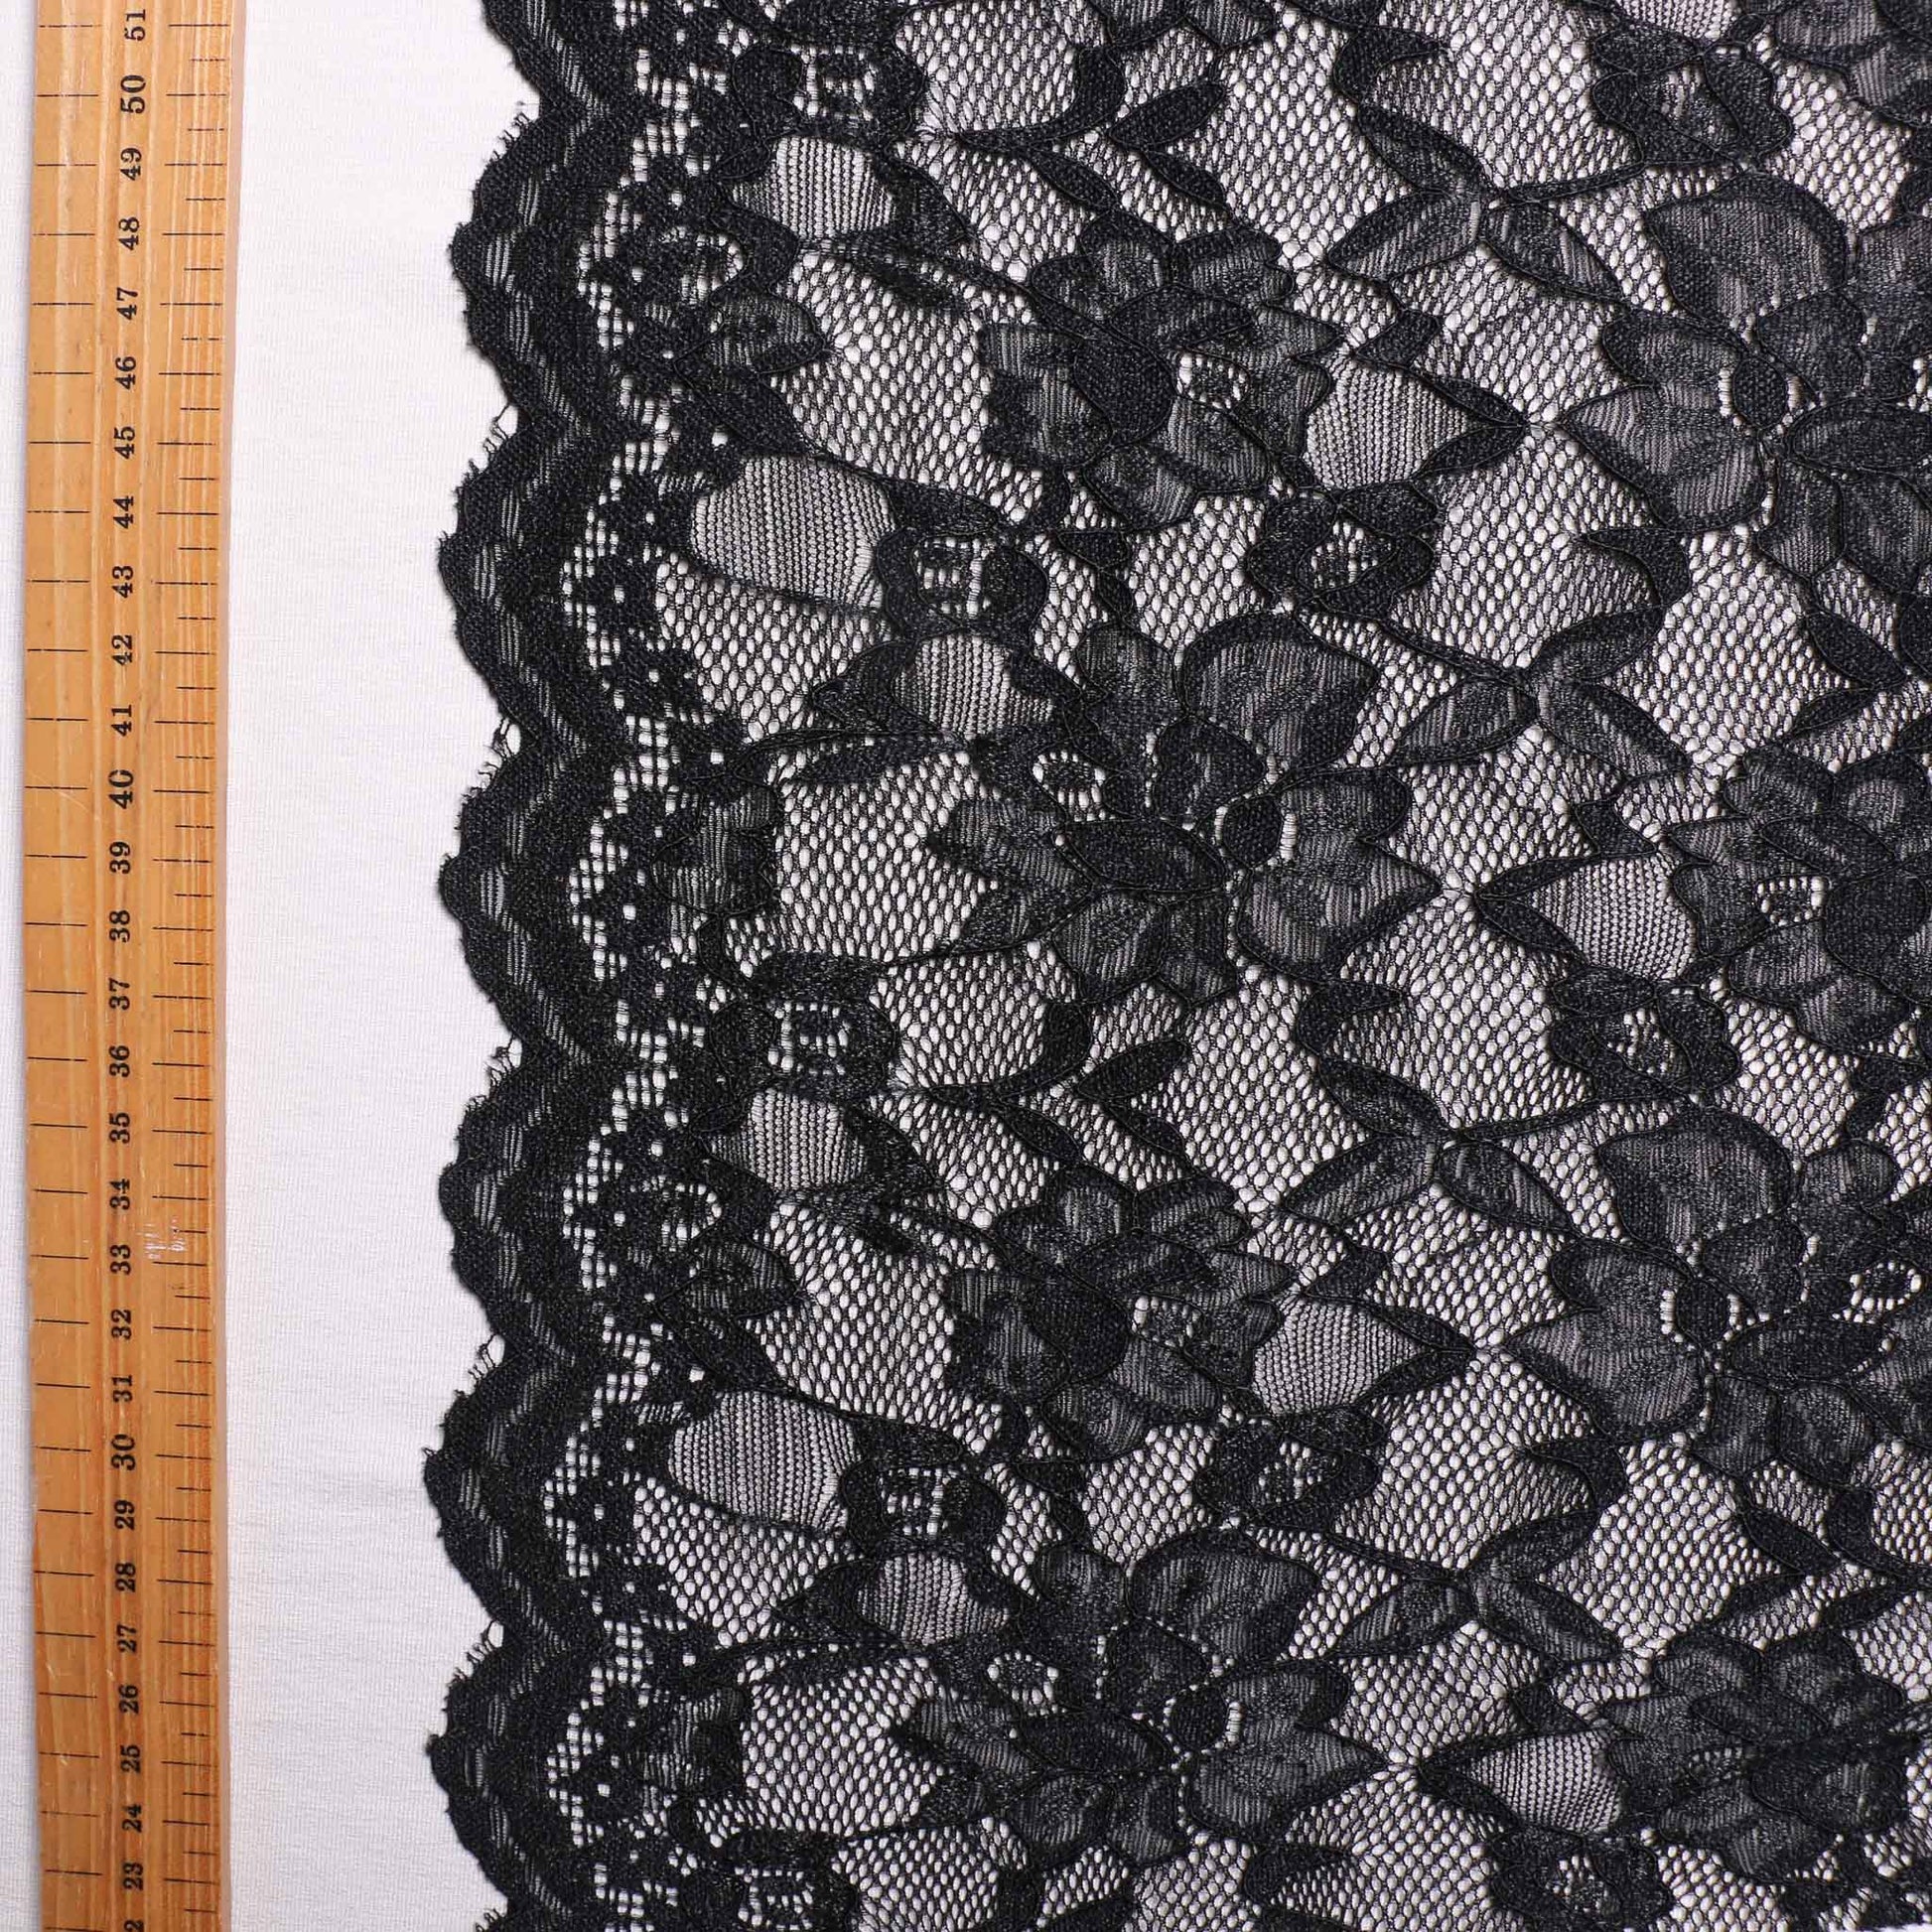 metre black lace dress fabric with scalloped edge